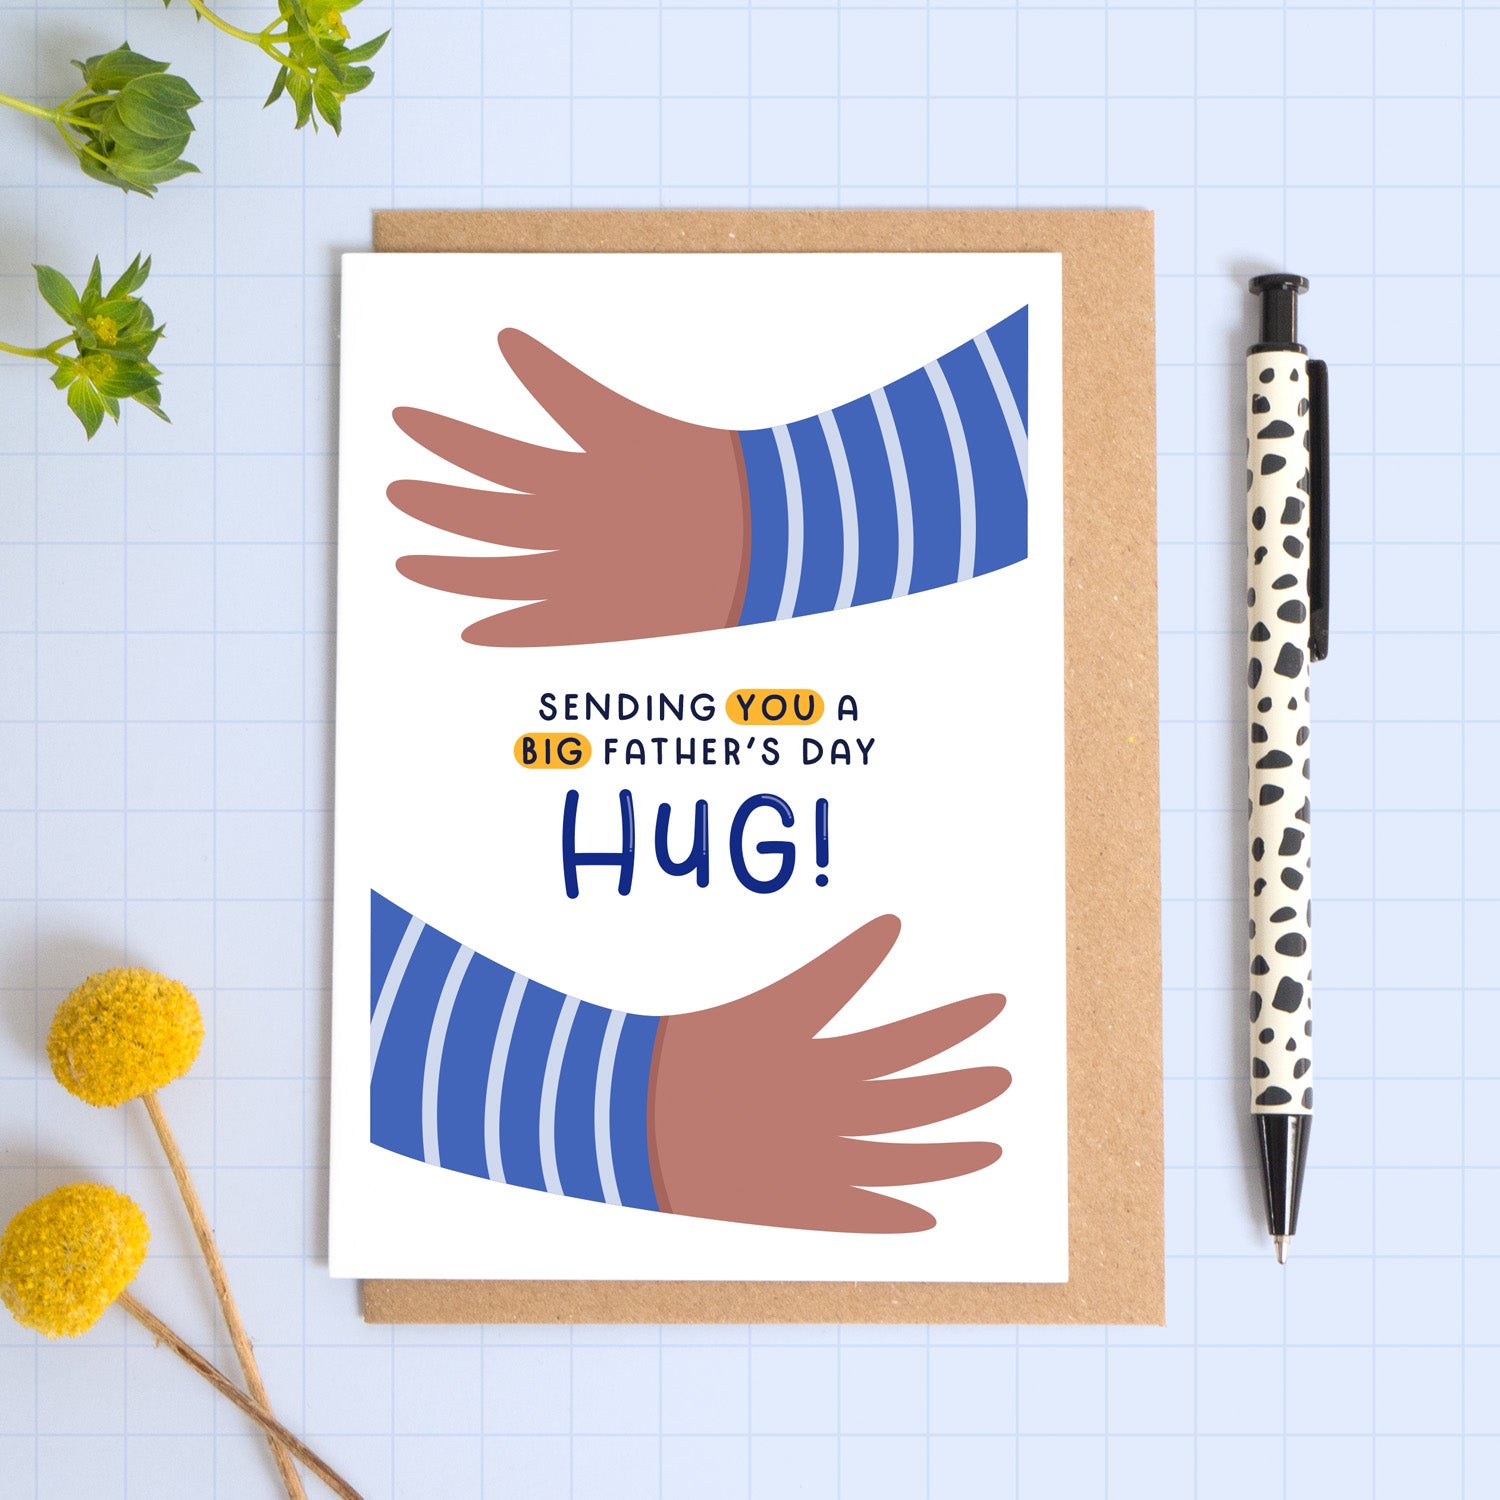 A card with two illustrated hands hugging the card and the phrase 'sending you a big father's day hug!'. This card is the version with the brown hands. The card is laid on a kraft brown envelope on top of a blue background next to a pen and flowers.